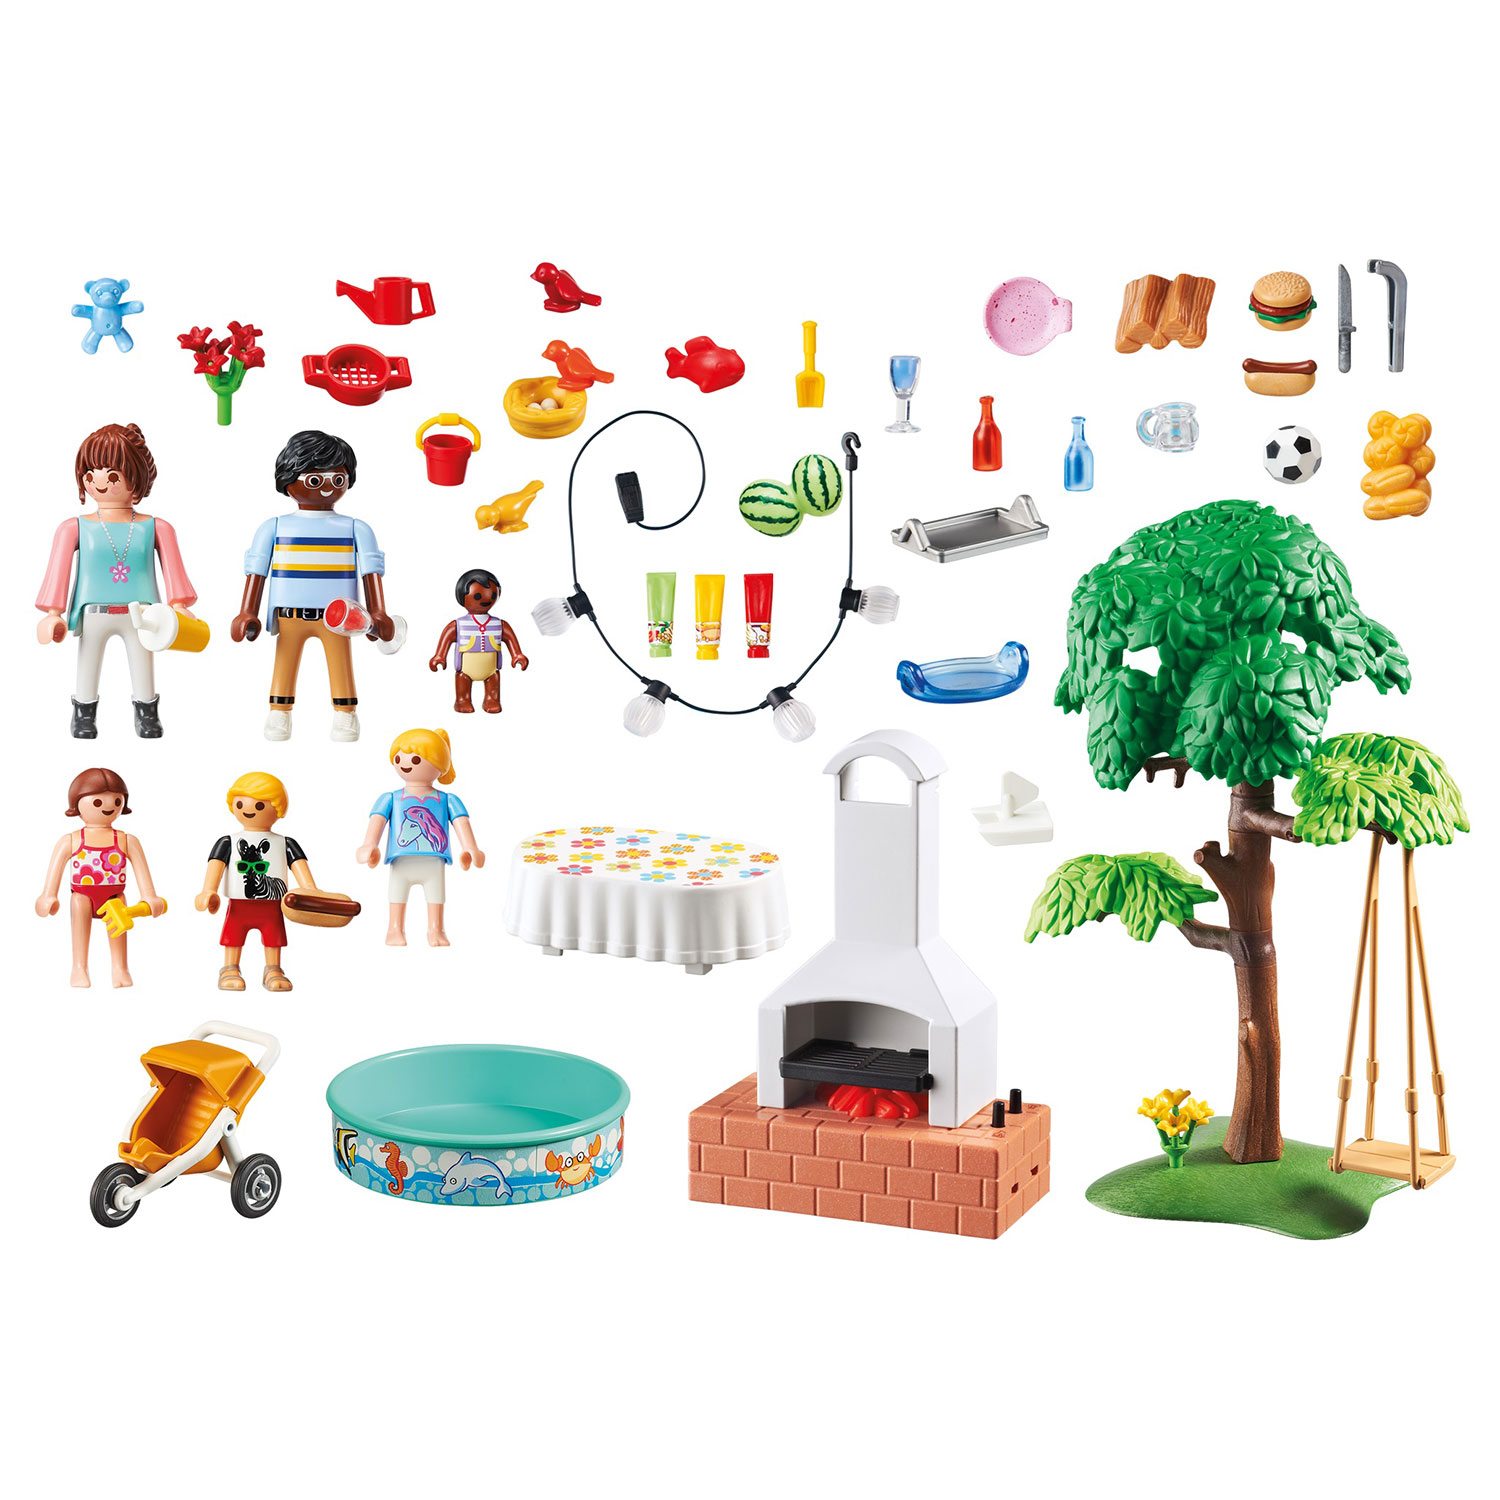 Playmobil 9272 Familiefeest met Barbecue